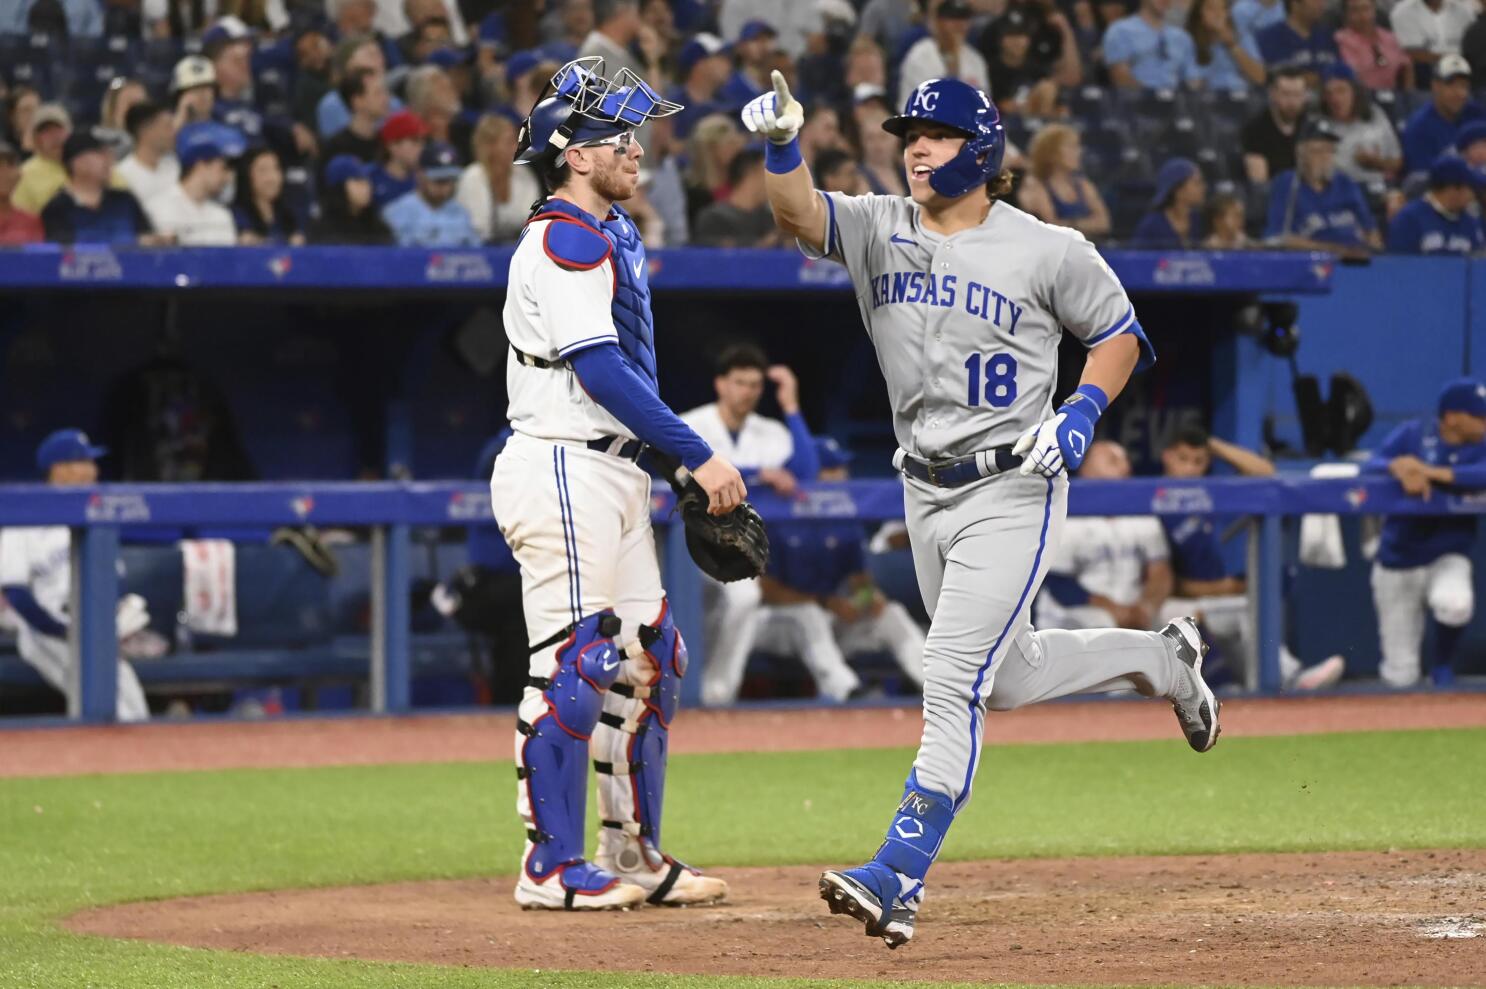 10 unvaccinated Royals players skipping trip to Toronto